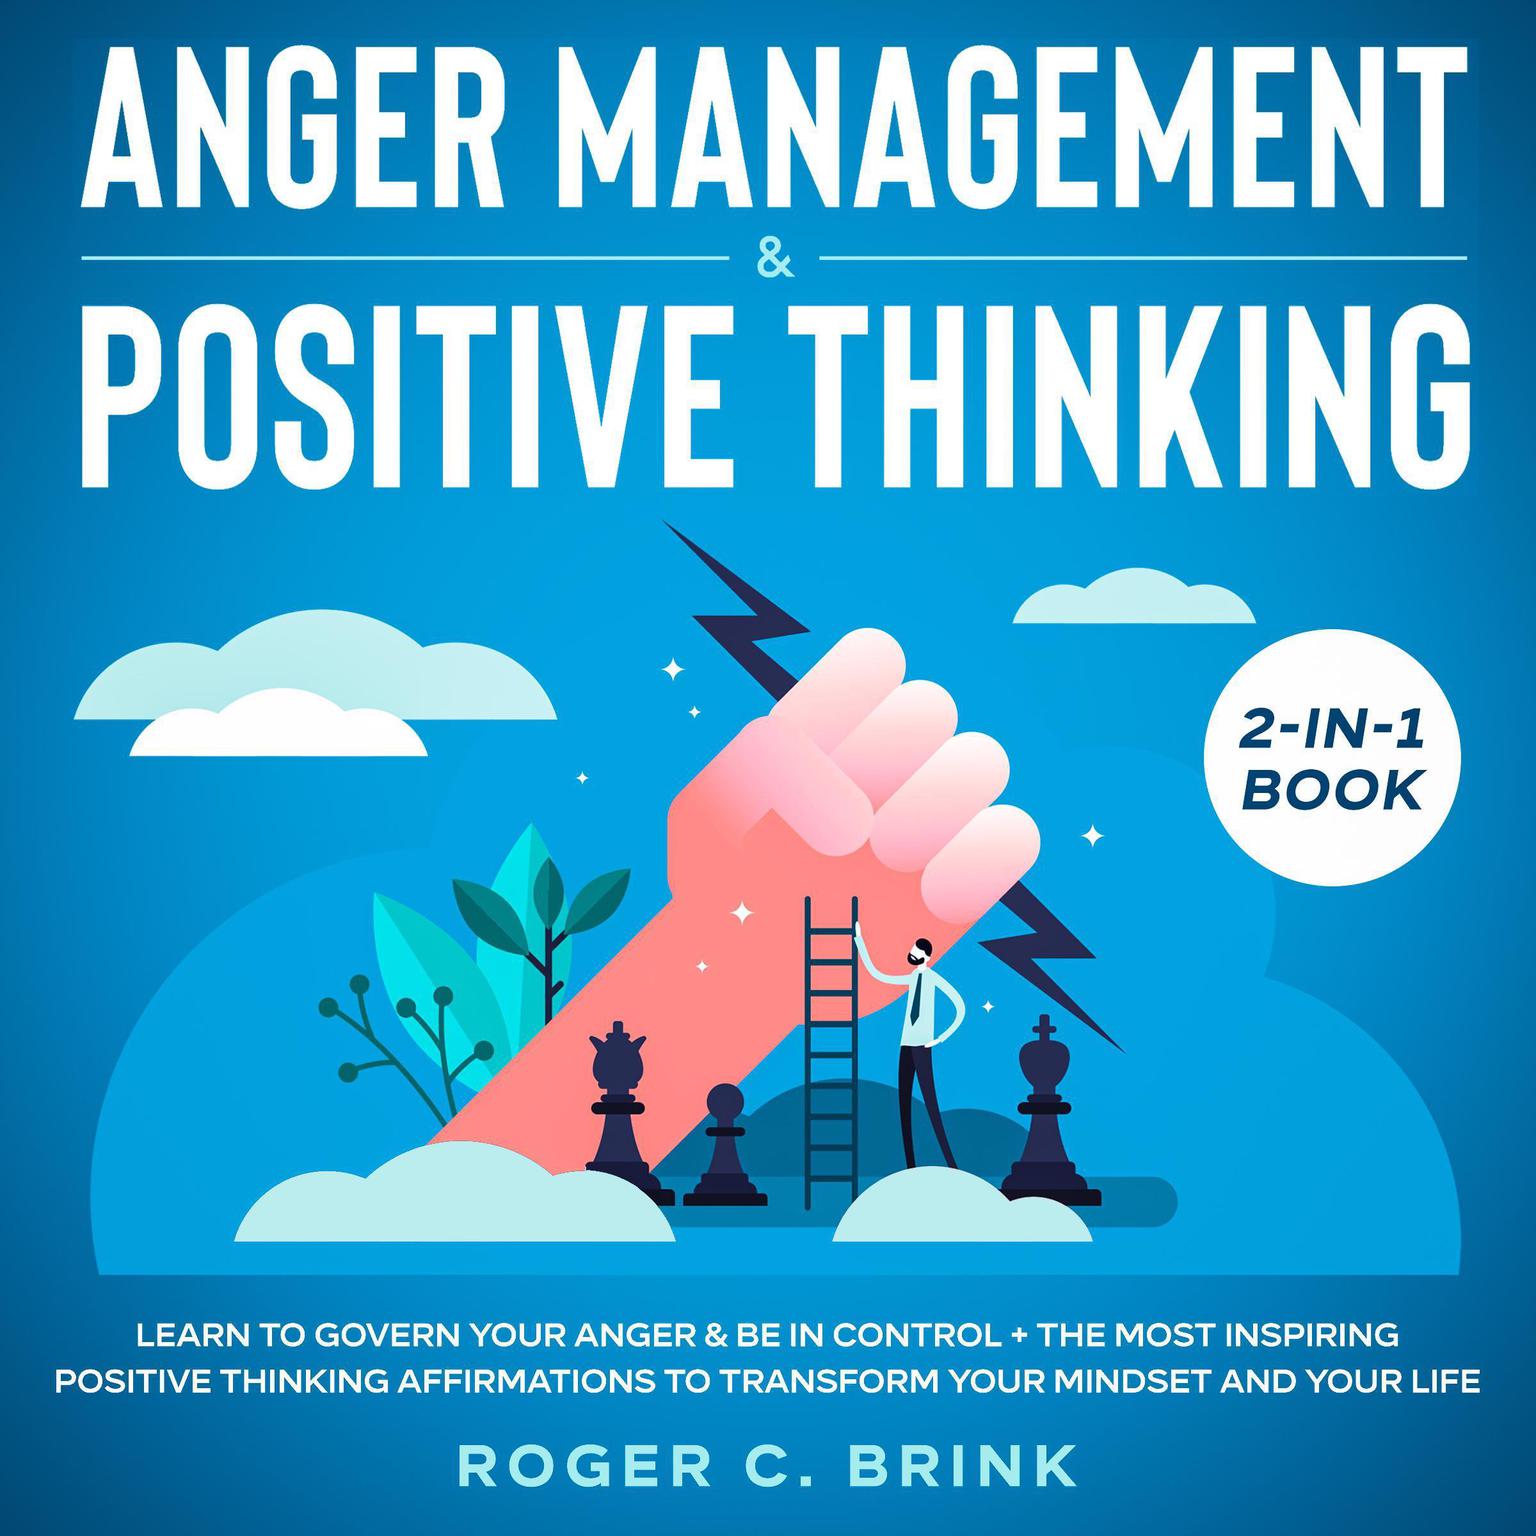 Anger Management & Positive Thinking 2-in-1 Book Learn to Govern Your Anger & Be in Control + The Most Inspiring Positive Thinking Affirmations to Transform Your Mindset and Your Life Audiobook, by Roger C. Brink